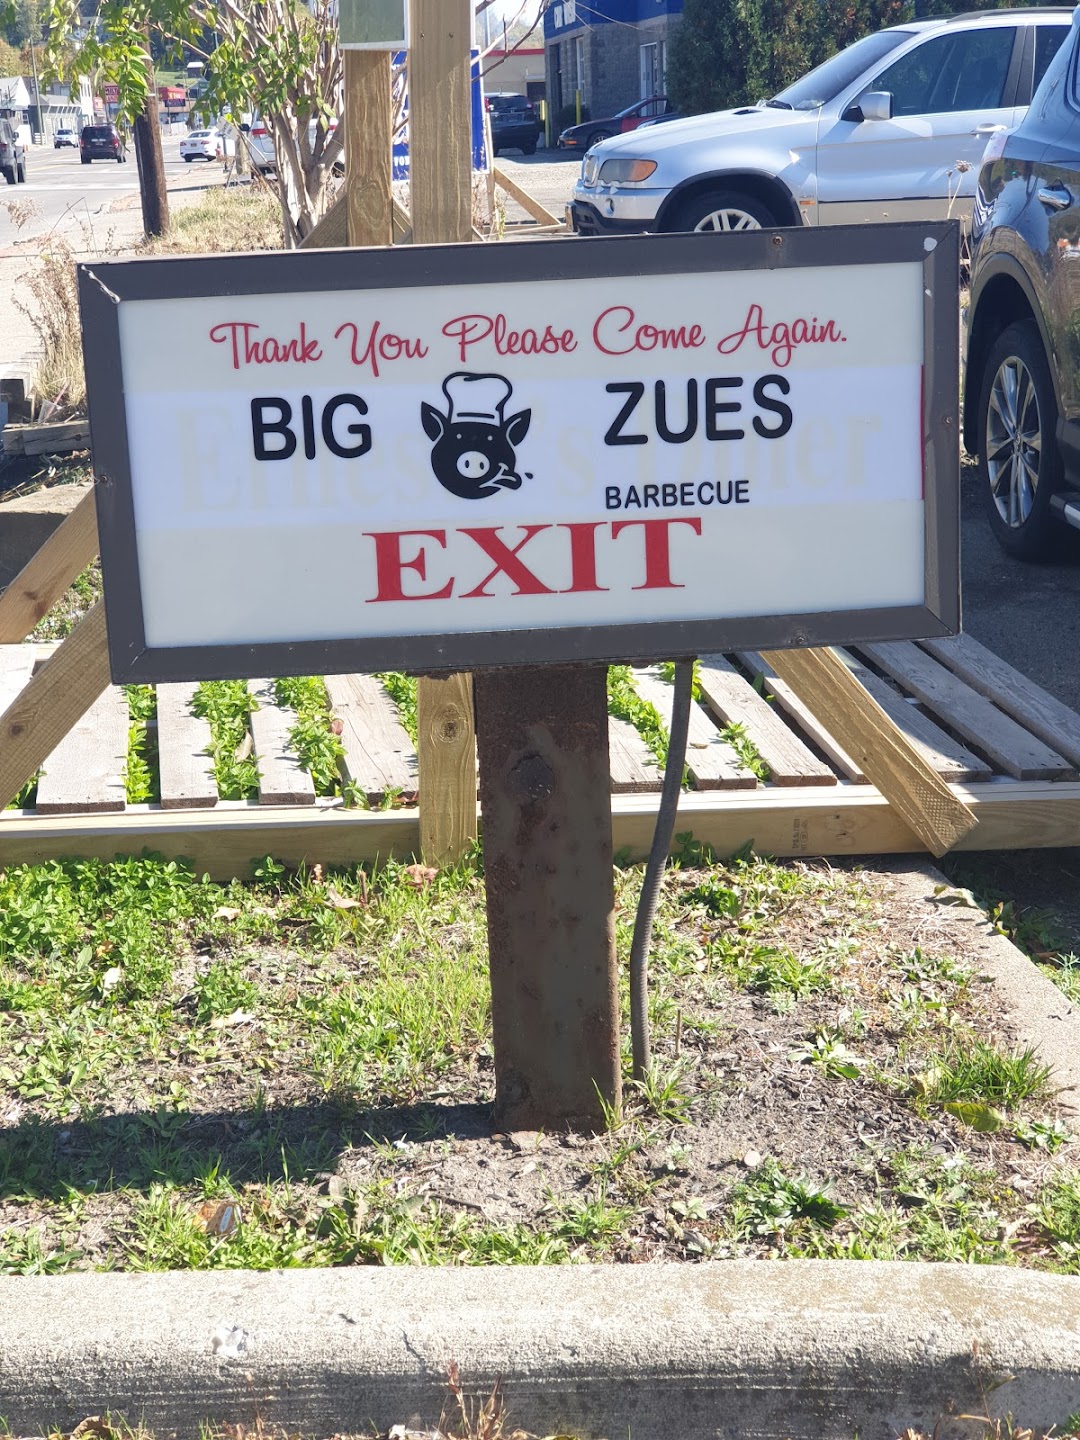 BIG ZUES Barbecue